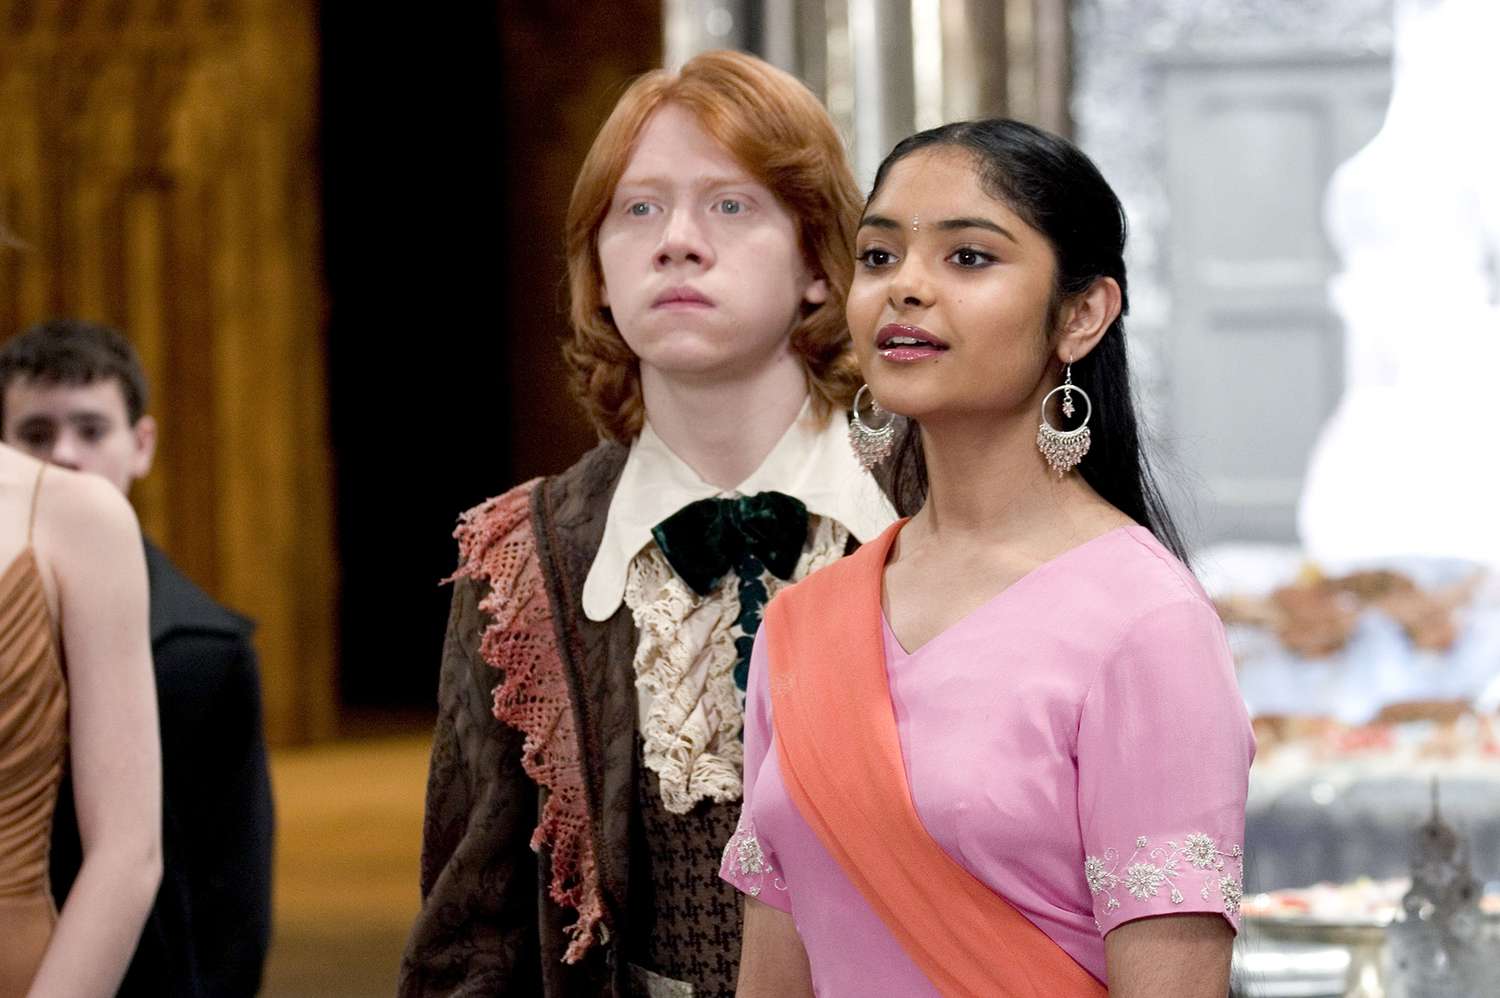 HARRY POTTER AND THE GOBLET OF FIRE, Rupert Grint, Afshan Azad, 2005, (c) Warner Brothers / courtesy